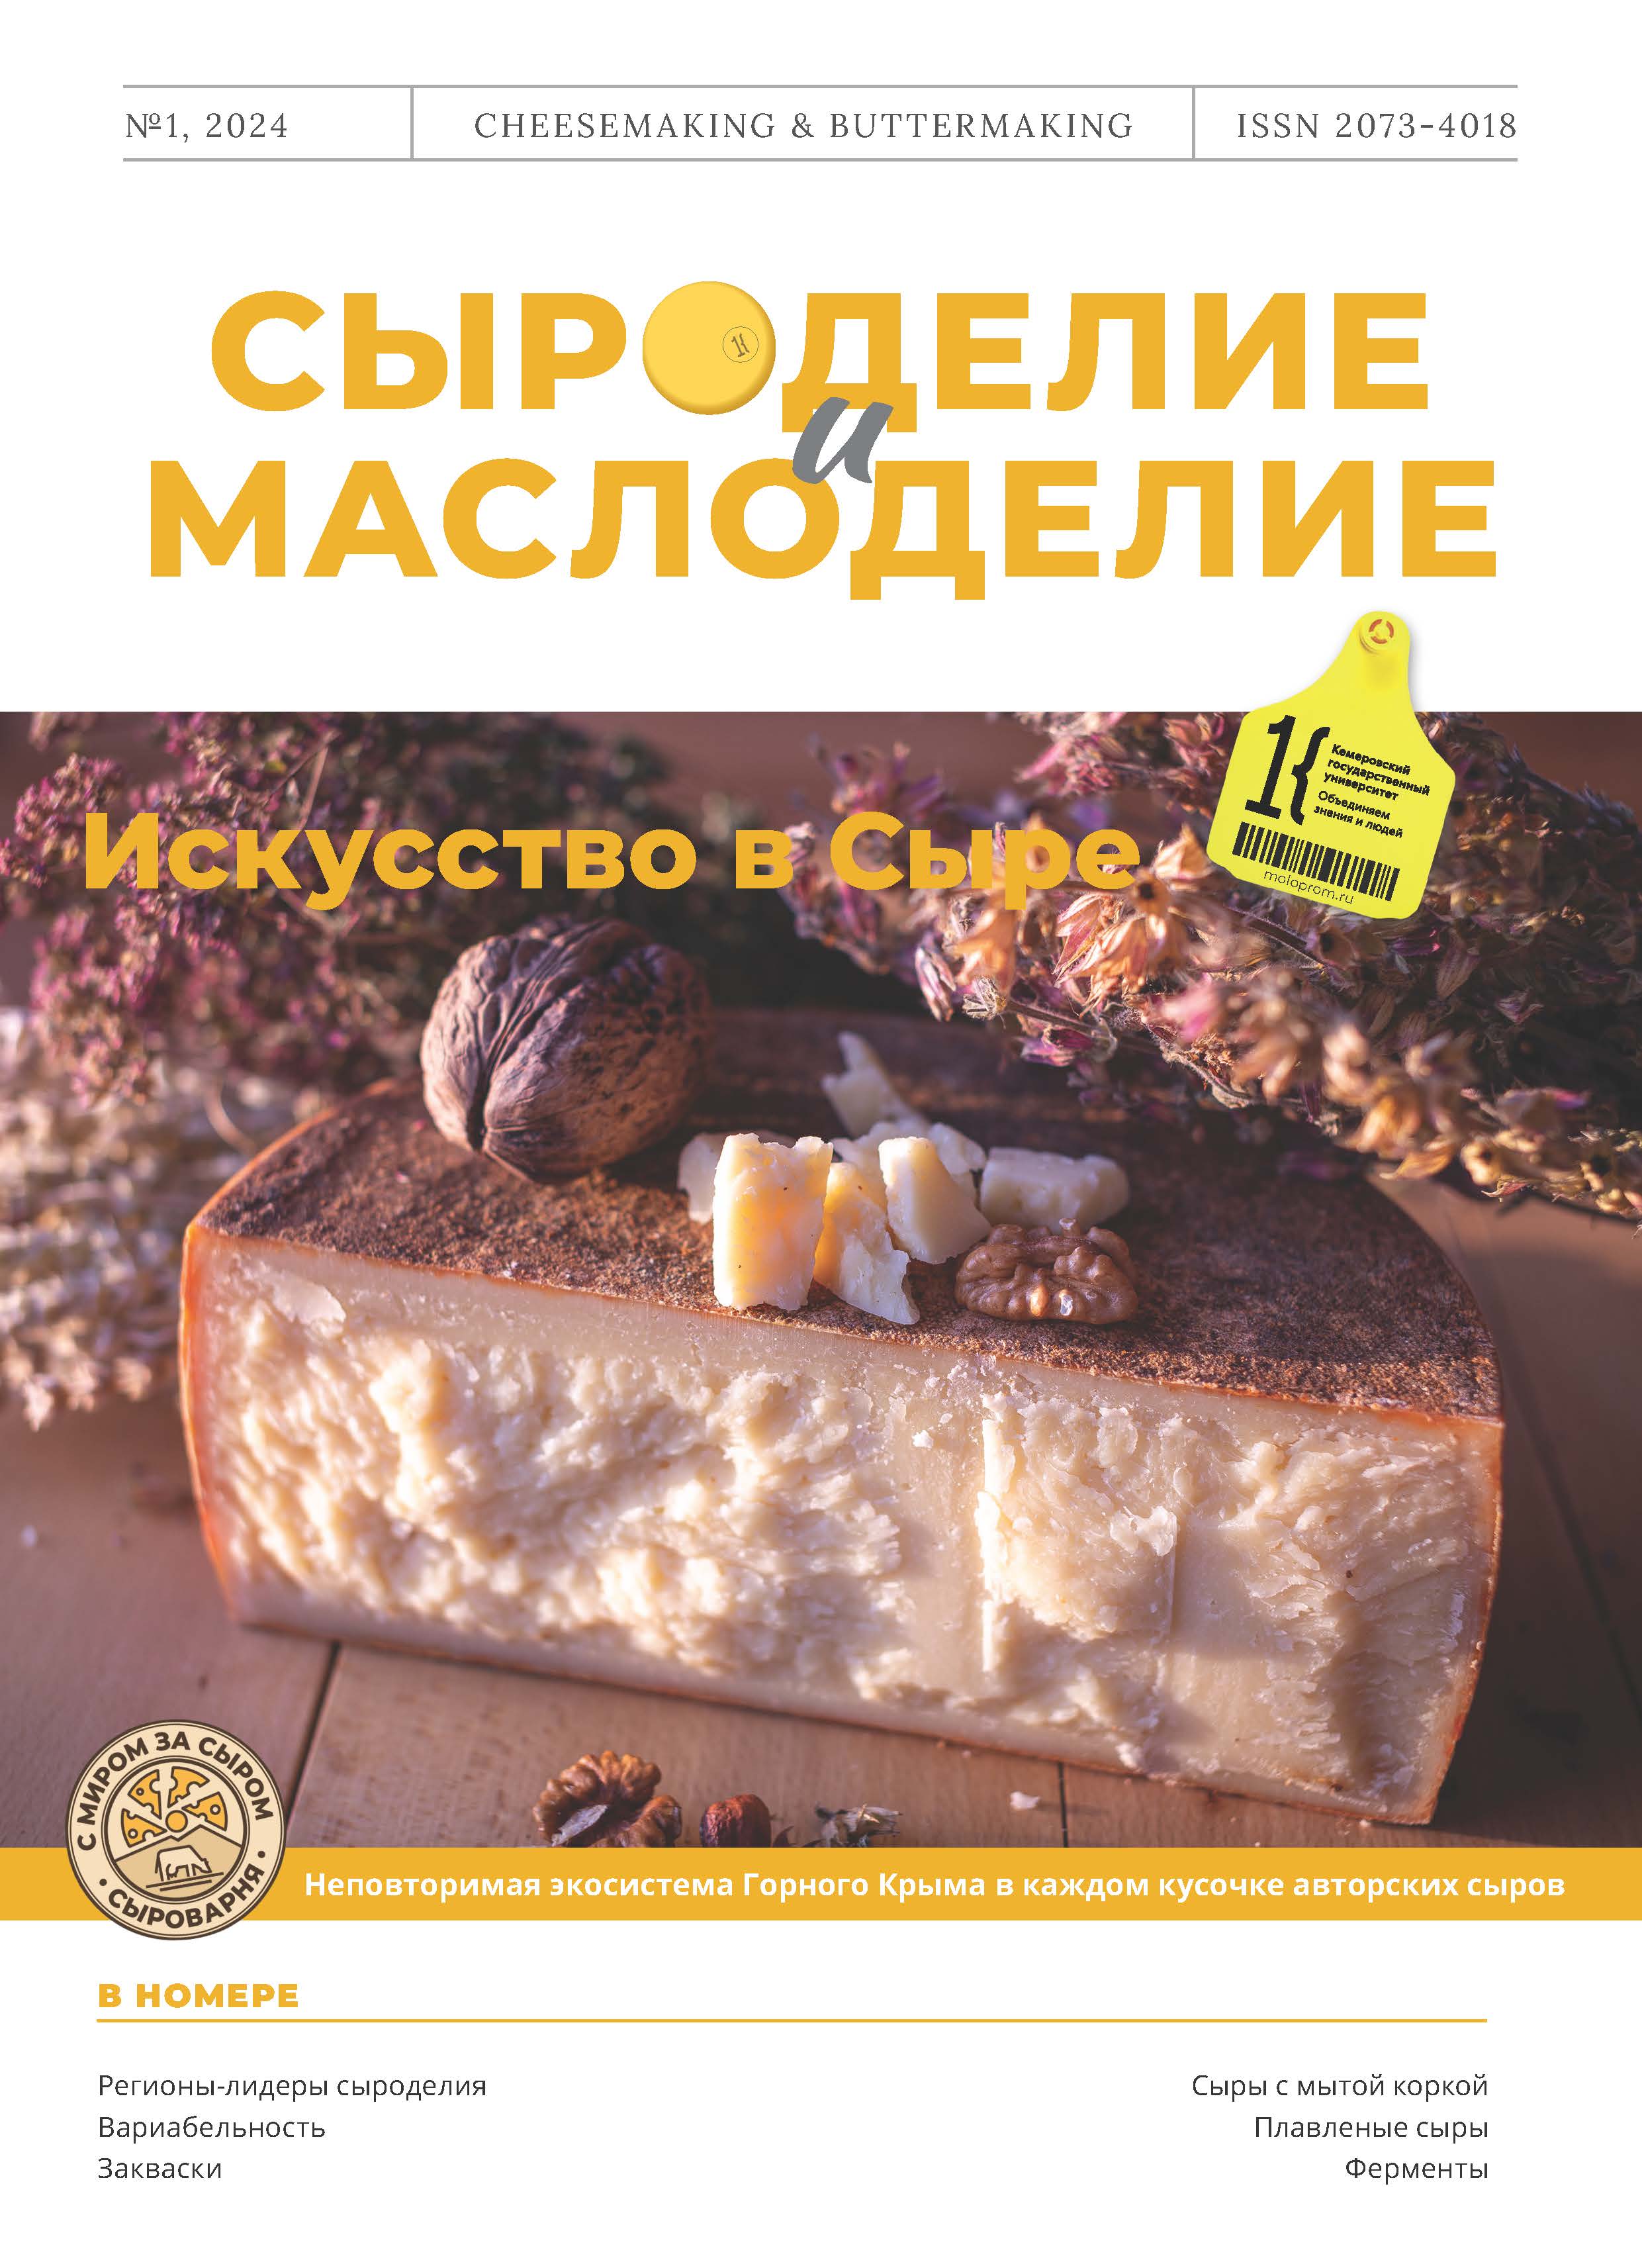                         Syrobogatov’s maasdam is cheese number one in retail choice awards
            